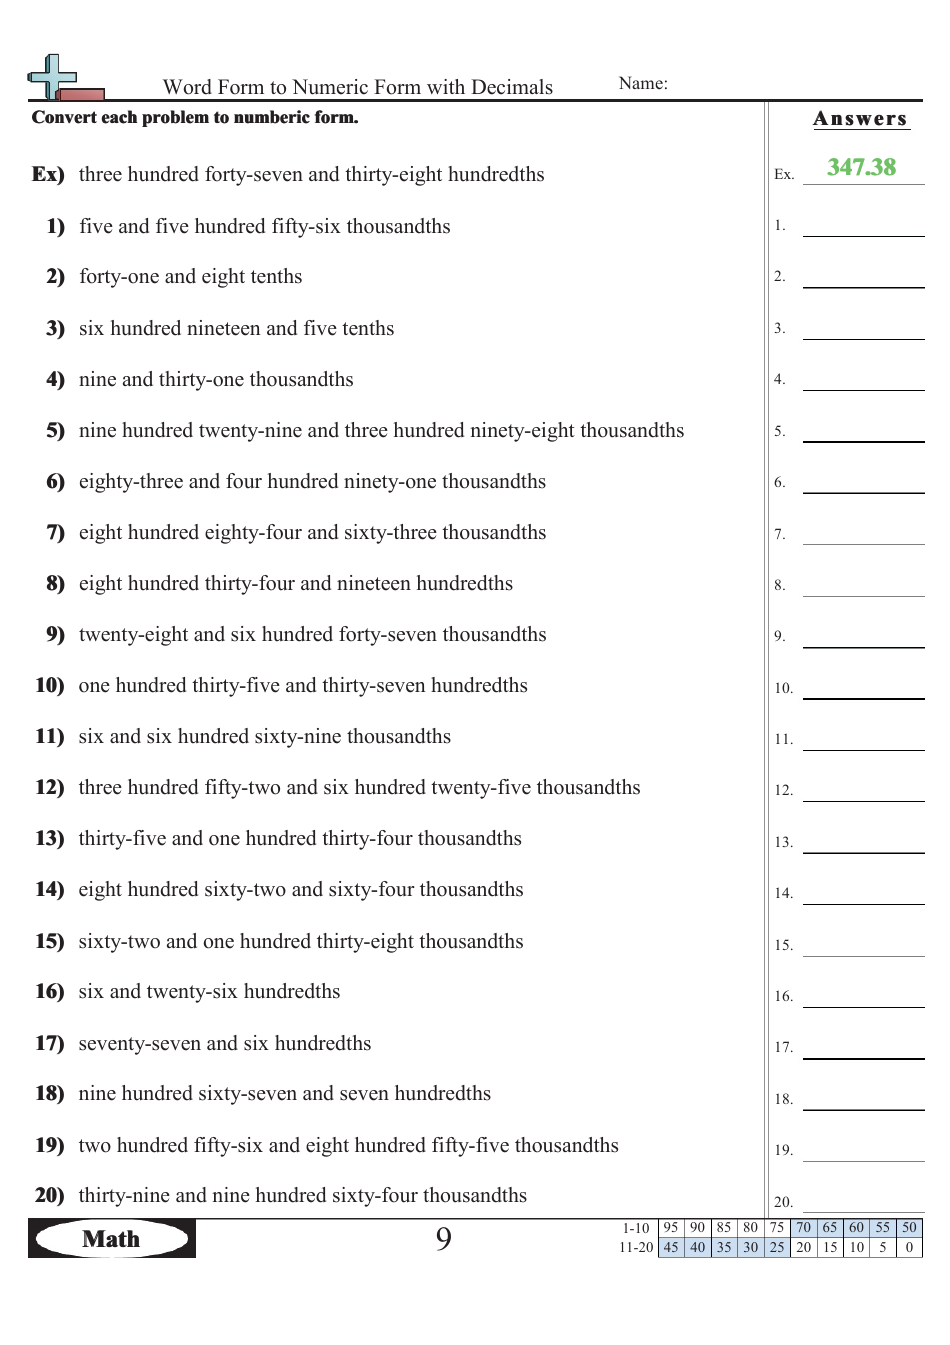 word-form-to-numeric-form-with-decimals-worksheet-with-answers-download